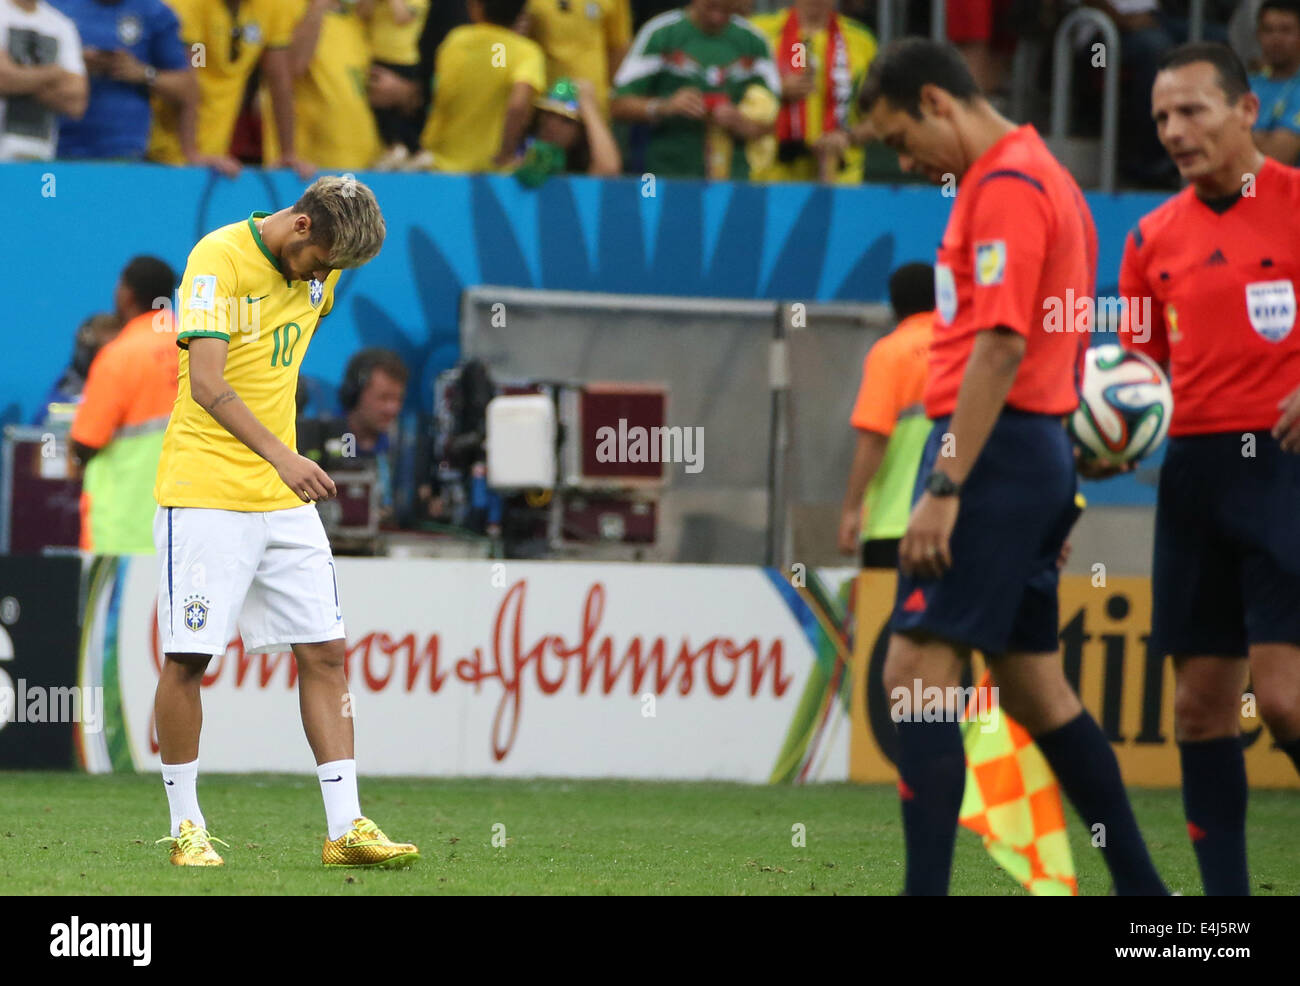 Brasilia, Brazil. 12th July, 2014. Brazil's Neymar (L) reacts after the third place play-off match between Brazil and Netherlands of 2014 FIFA World Cup at the Estadio Nacional Stadium in Brasilia, Brazil, on July 12, 2014. Netherlands won 3-0 over Brazil and took the third place of the tournament on Saturday. Credit:  Cao Can/Xinhua/Alamy Live News Stock Photo